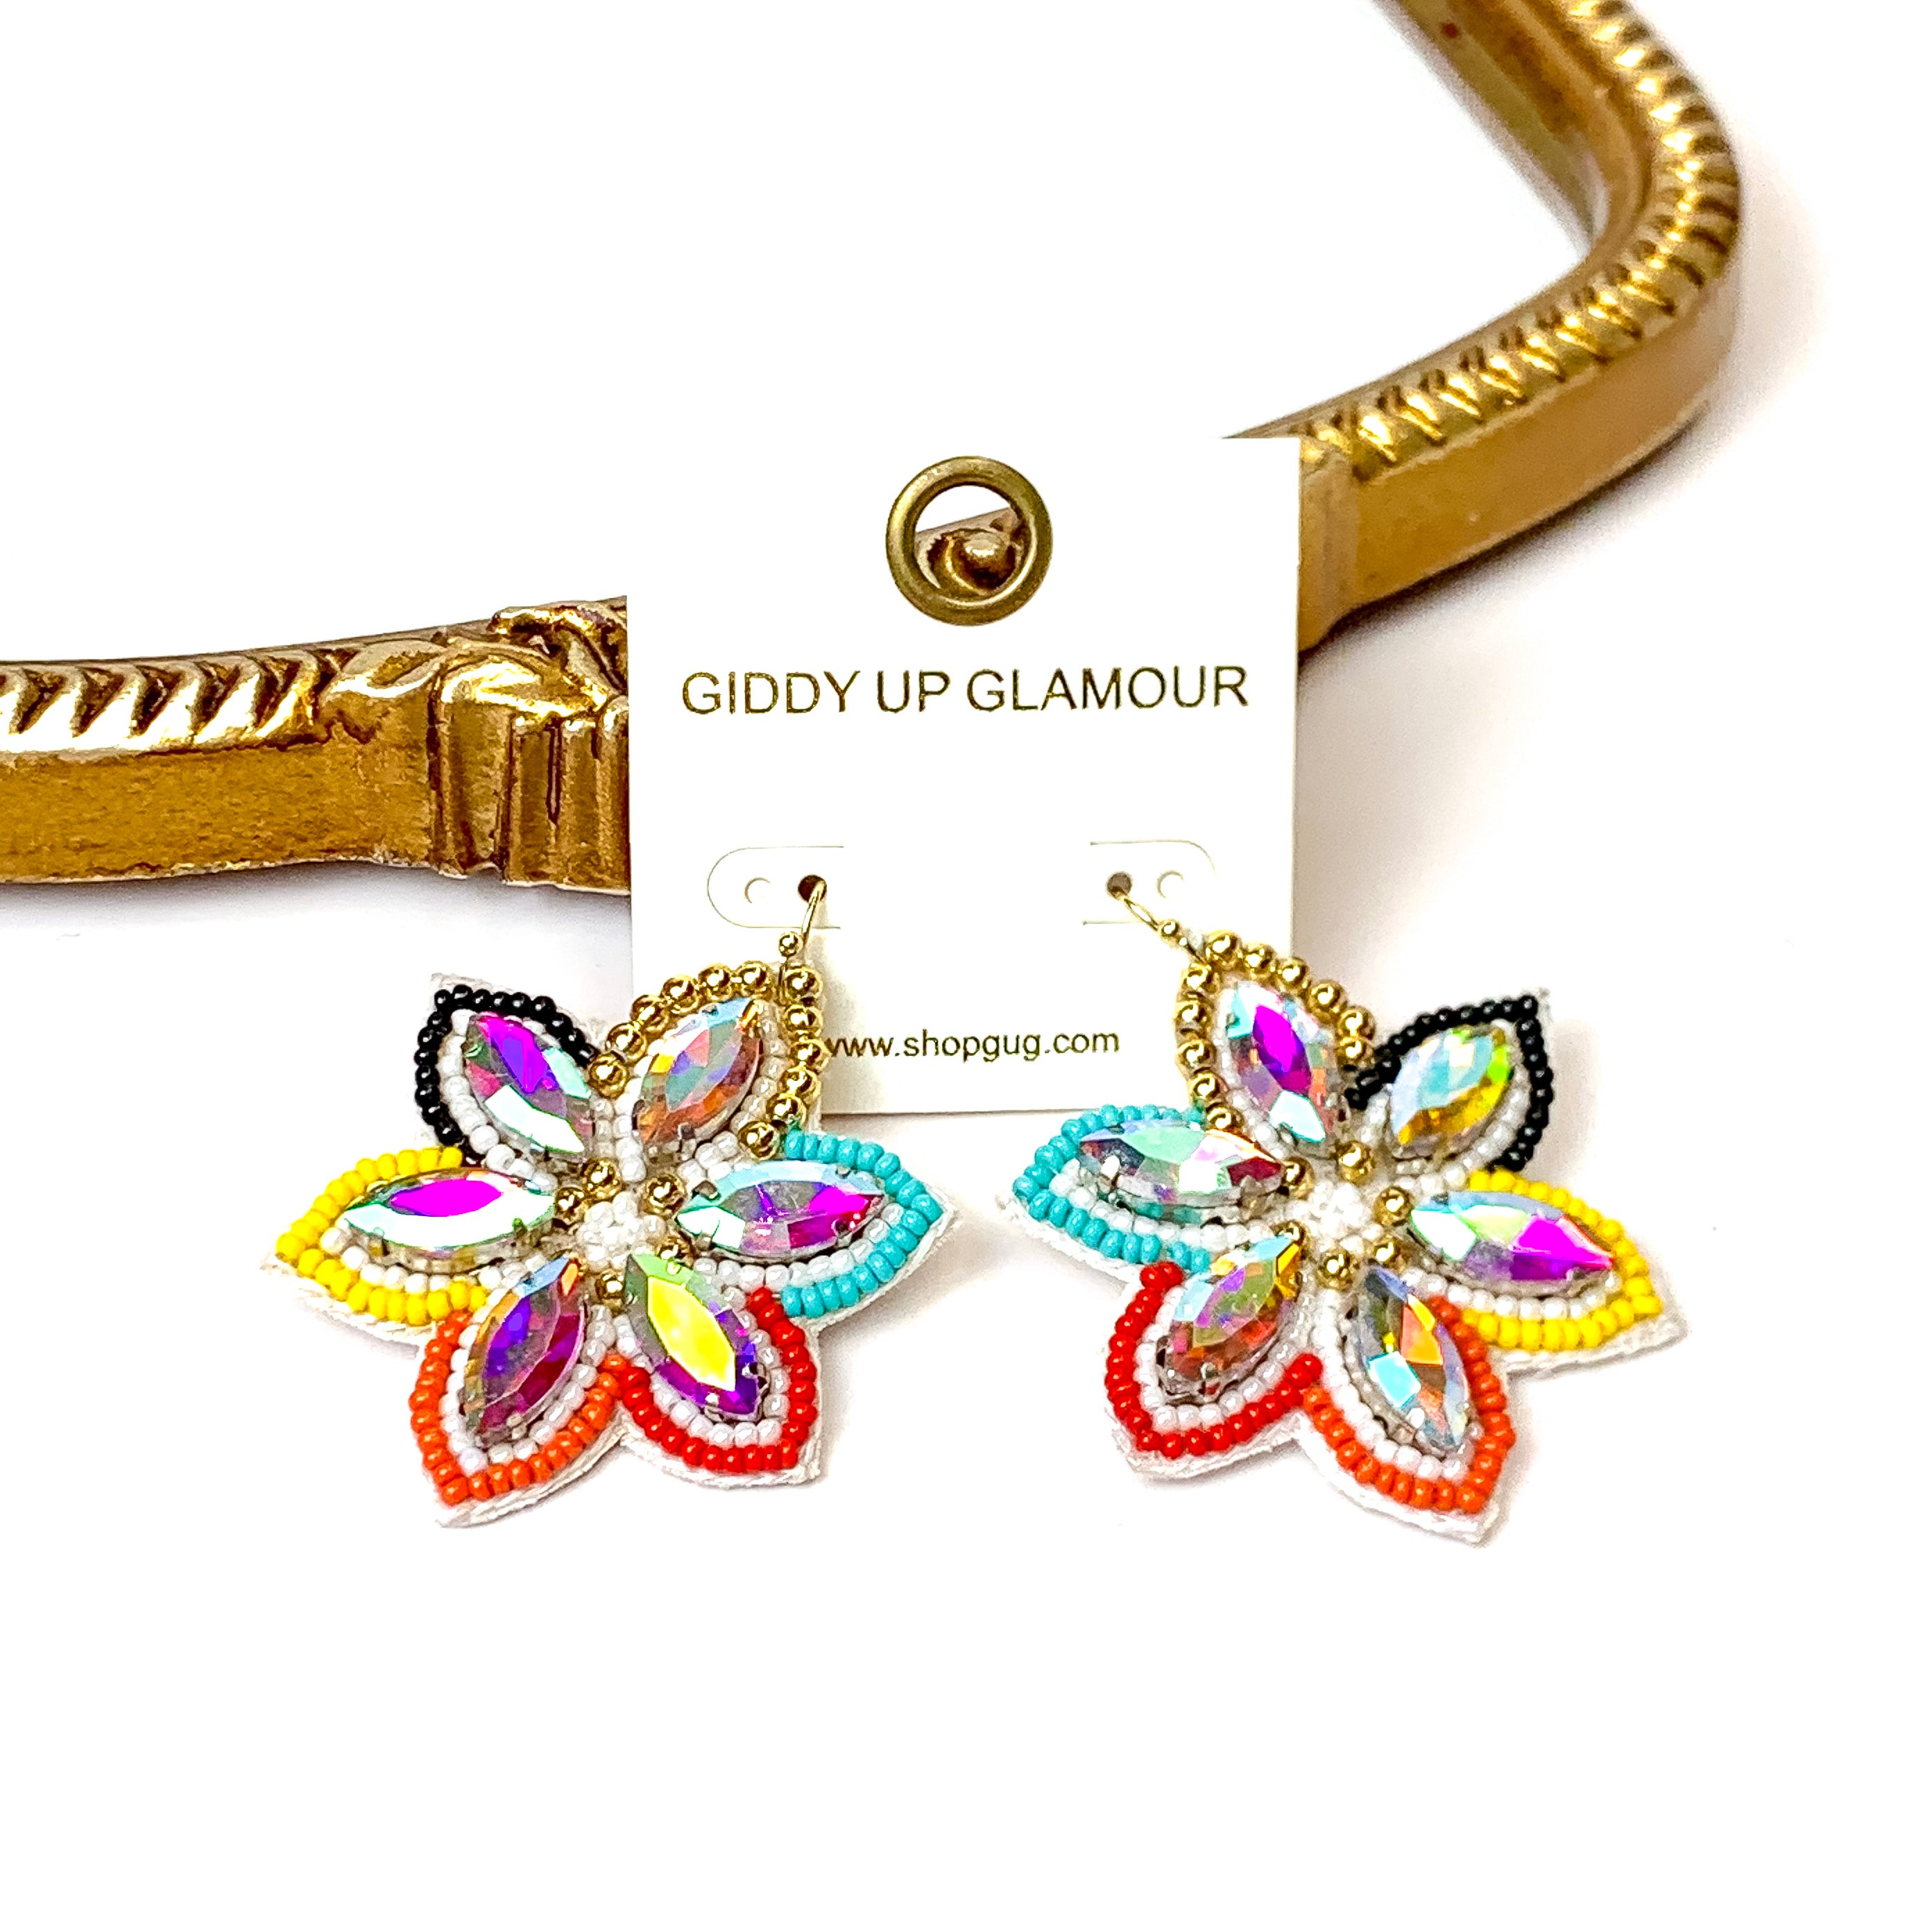 Desert Daisy Multicolored Flower Shaped Earrings with AB Crystal Accents in White - Giddy Up Glamour Boutique